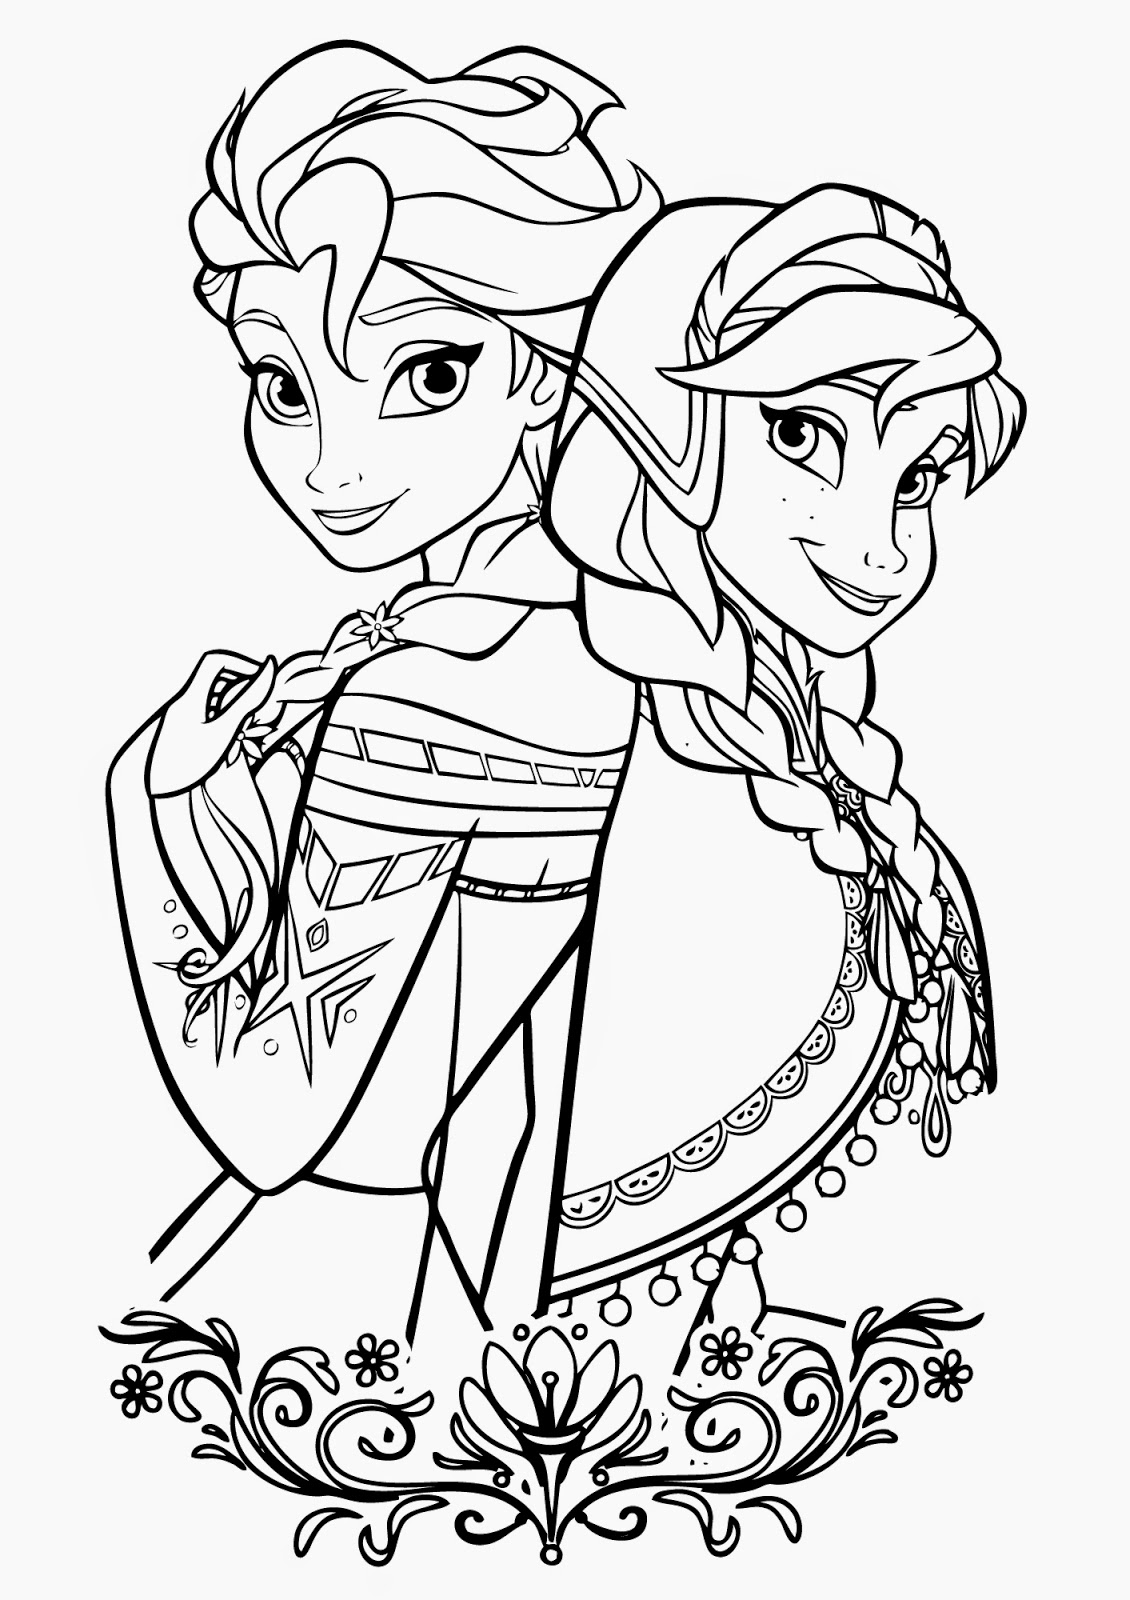 Elsa Magic Coloring Page   Only Coloring Pages